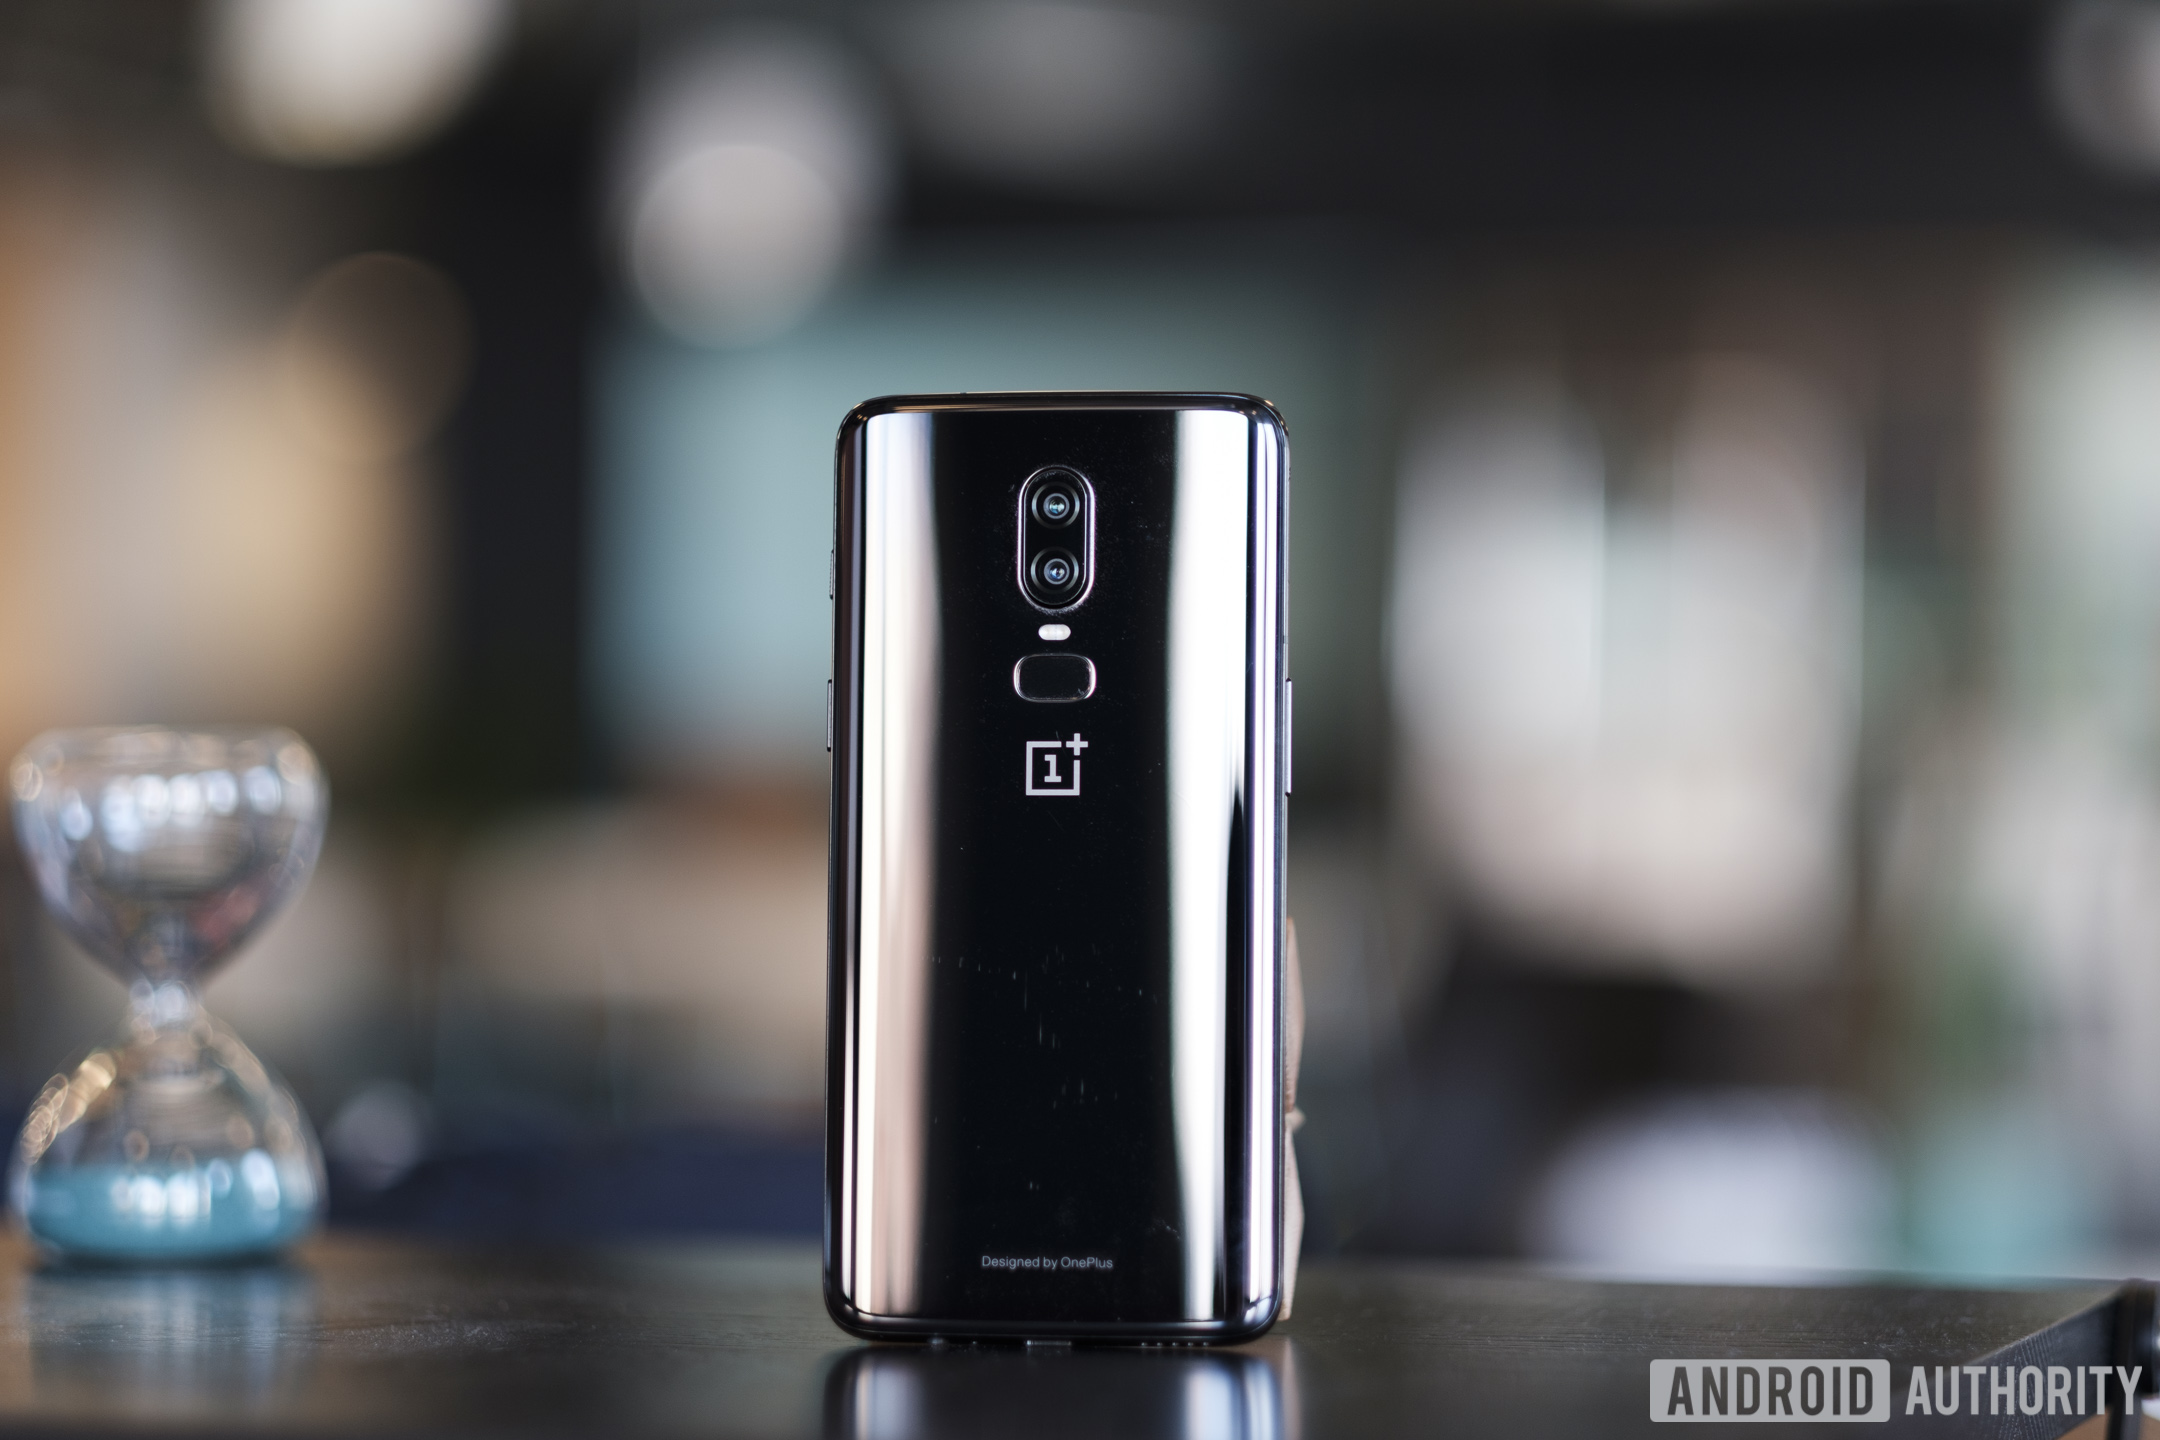 The OnePlus 6 smartphone in black pictured from behind and standing on a table.